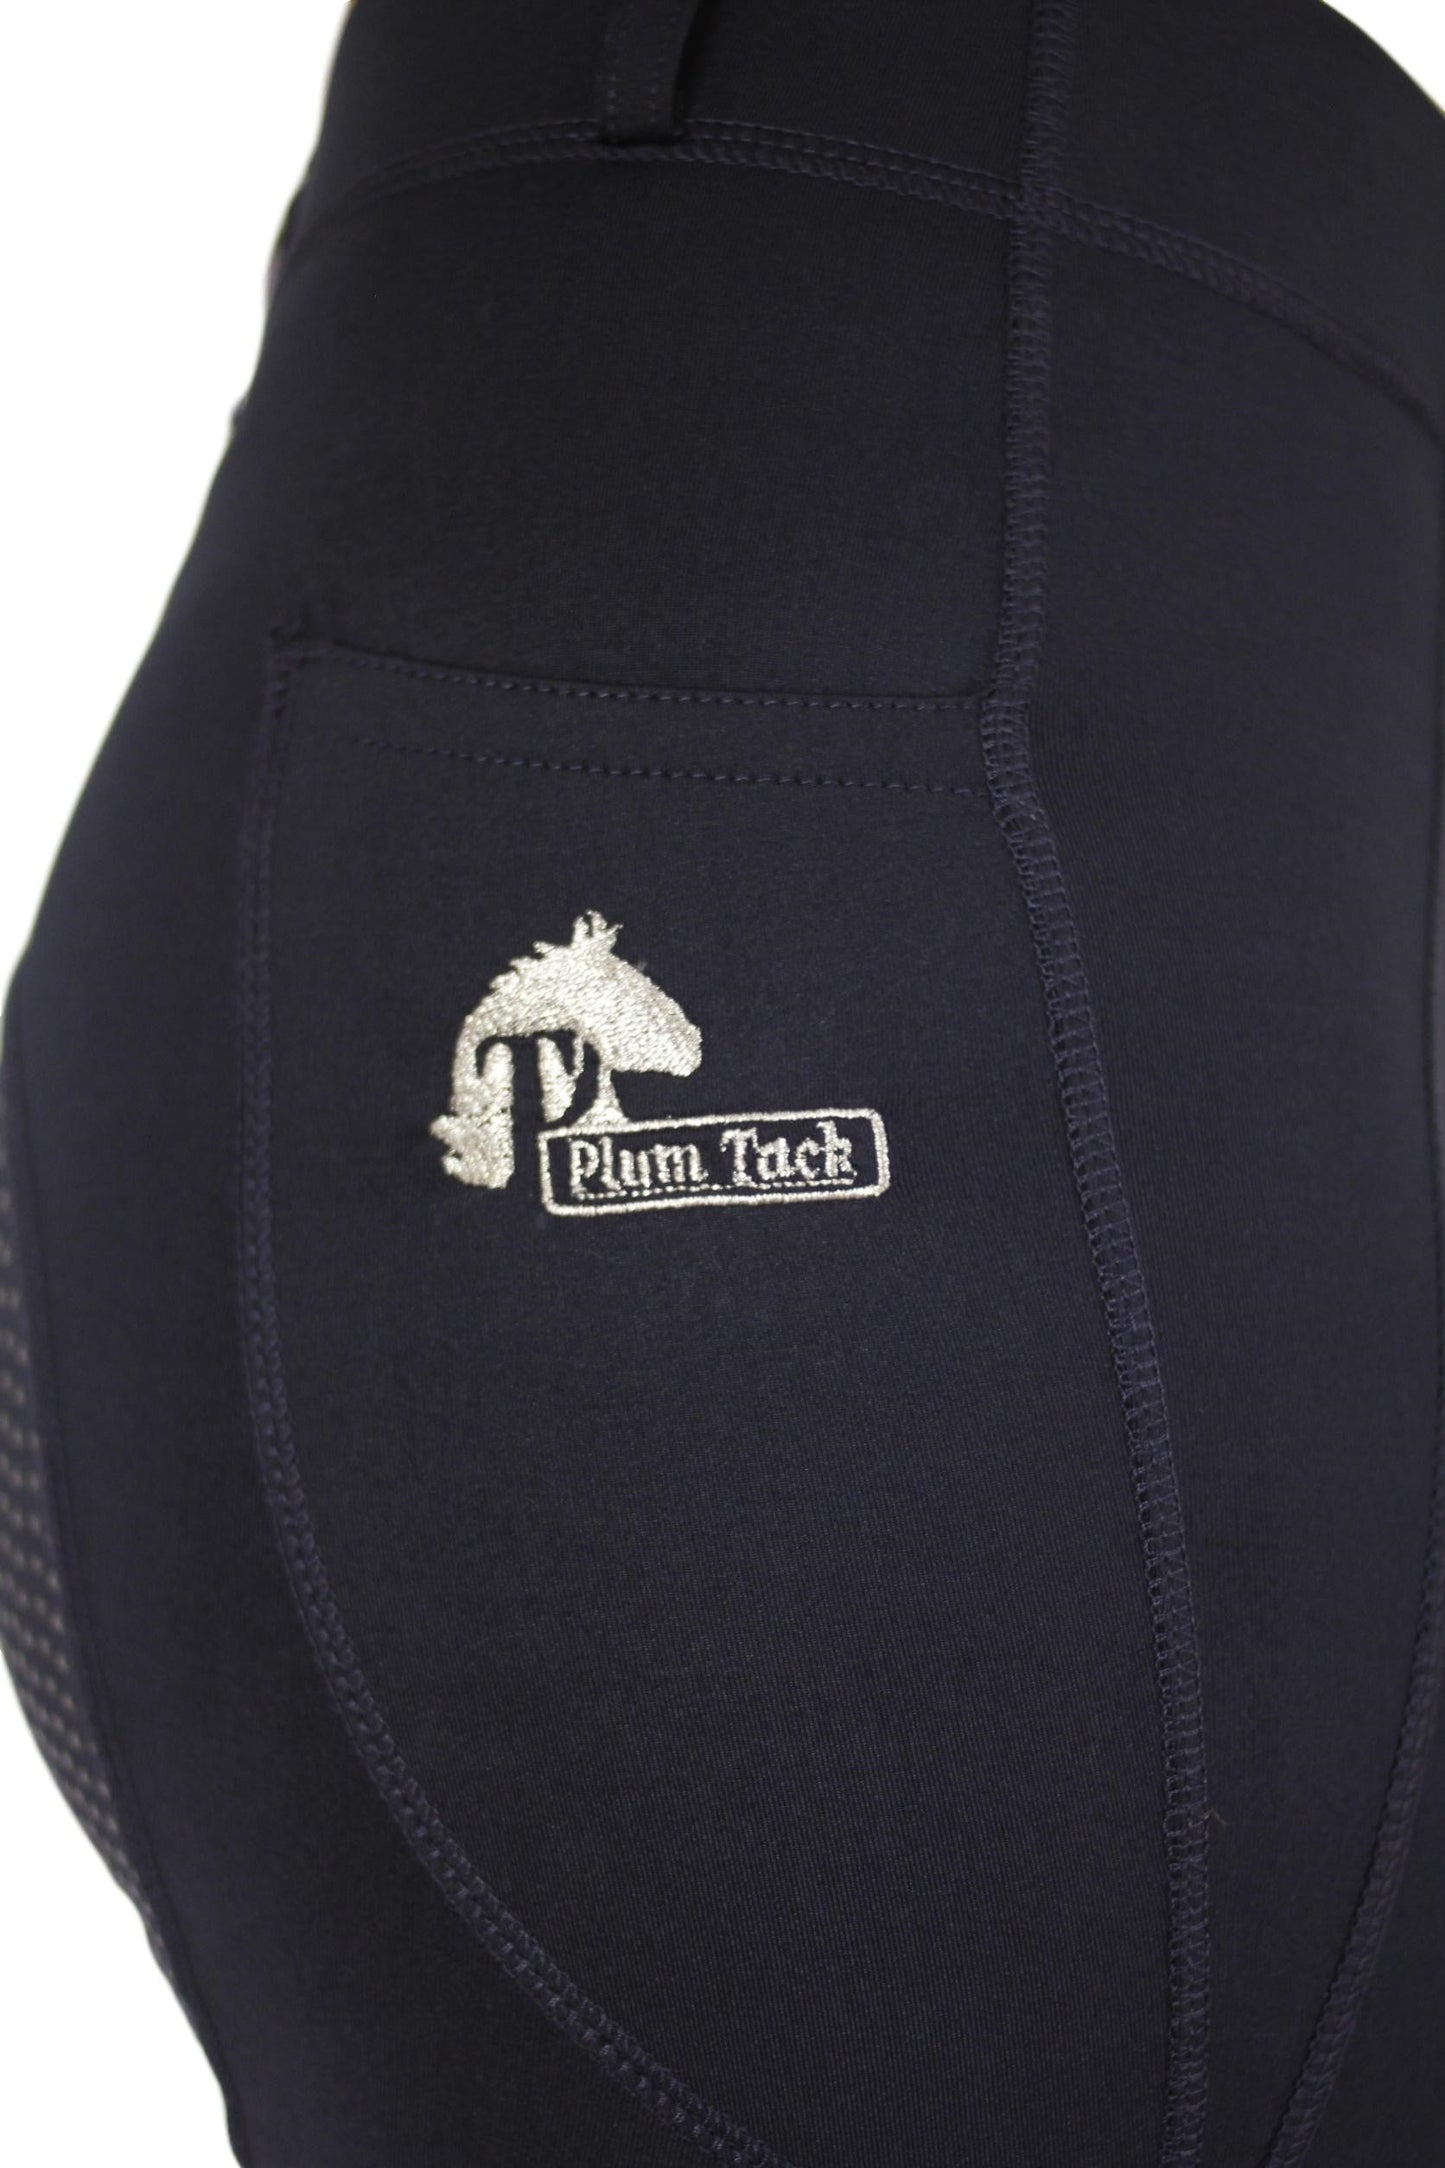 Close-up of navy horse riding tights with embroidered logo "Plum Tack."